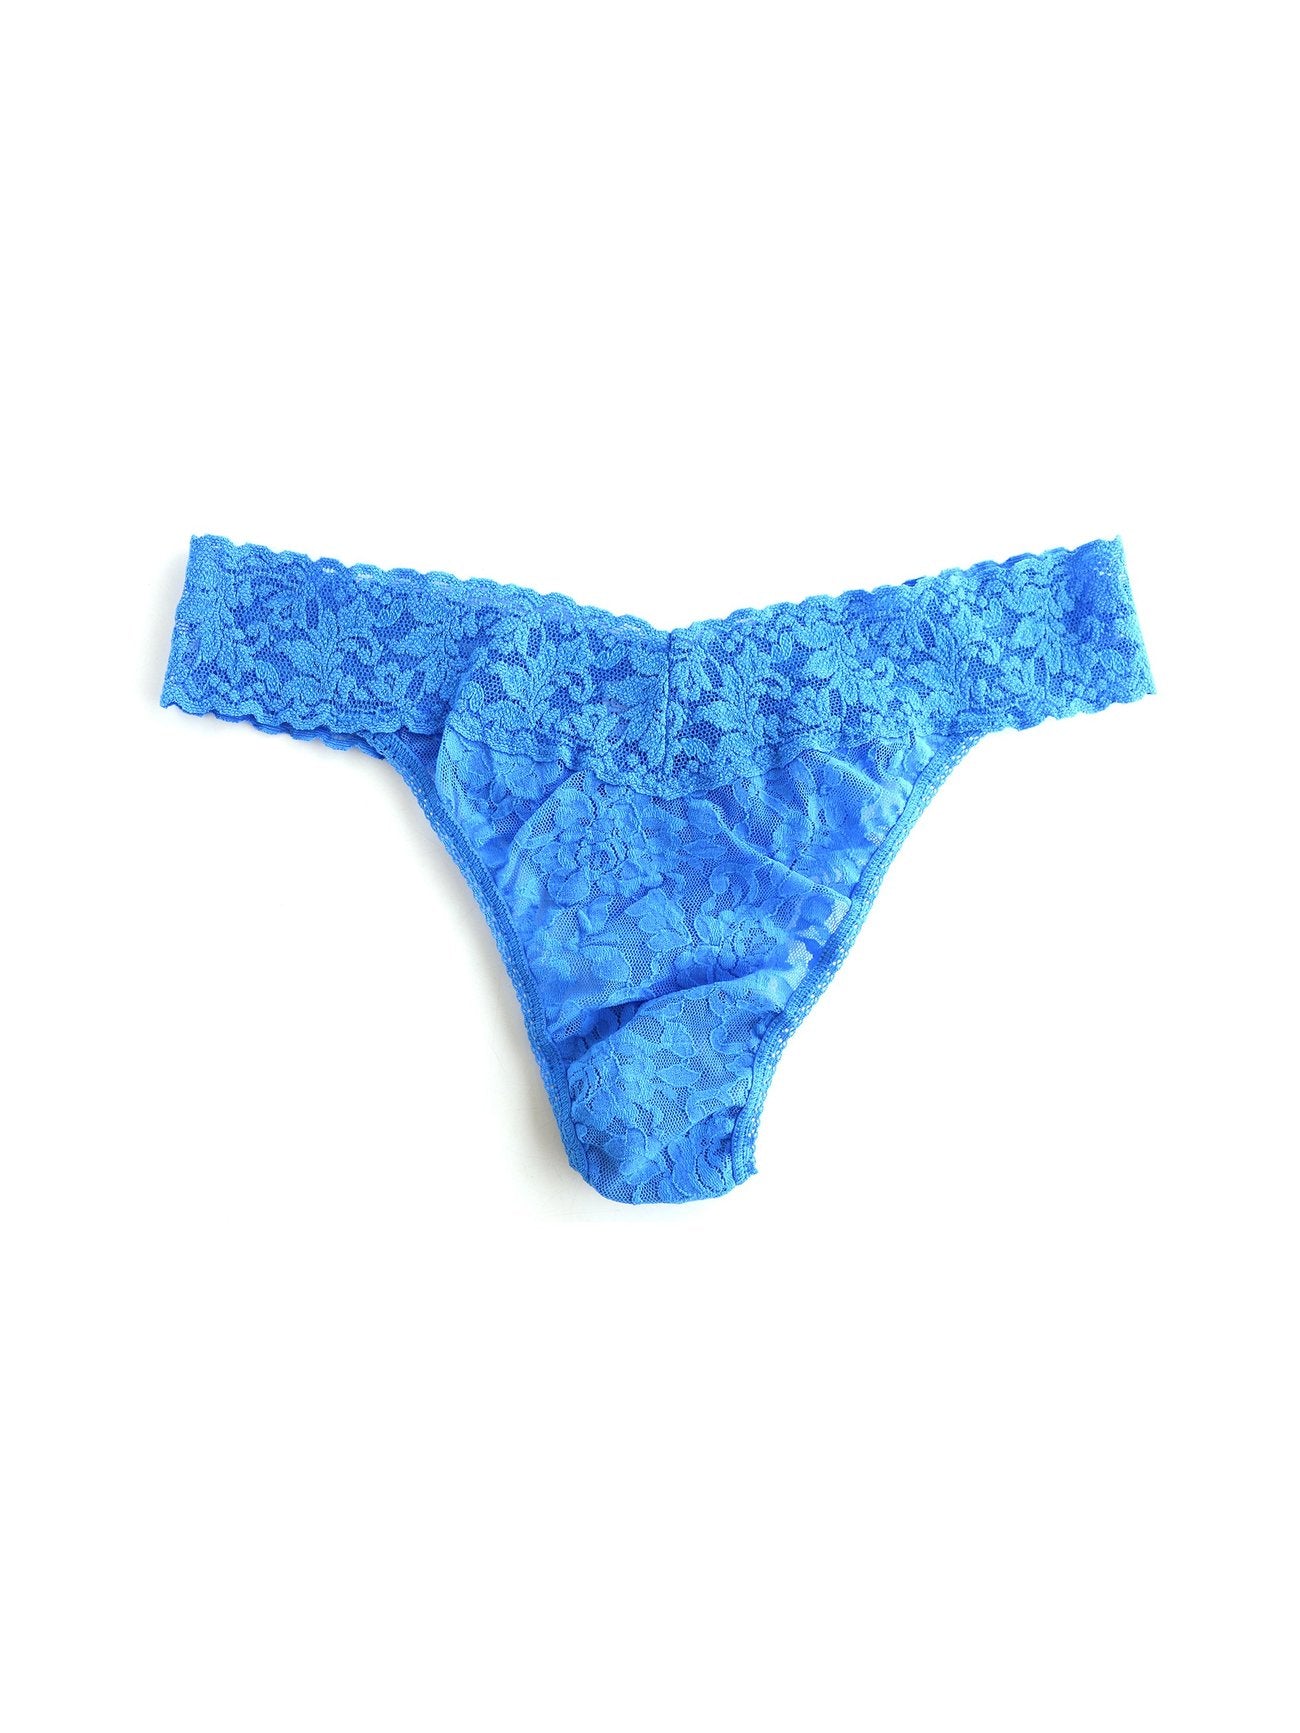 Hanky Panky Signature Lace Original Rise Thong-Packaged 4811p-29